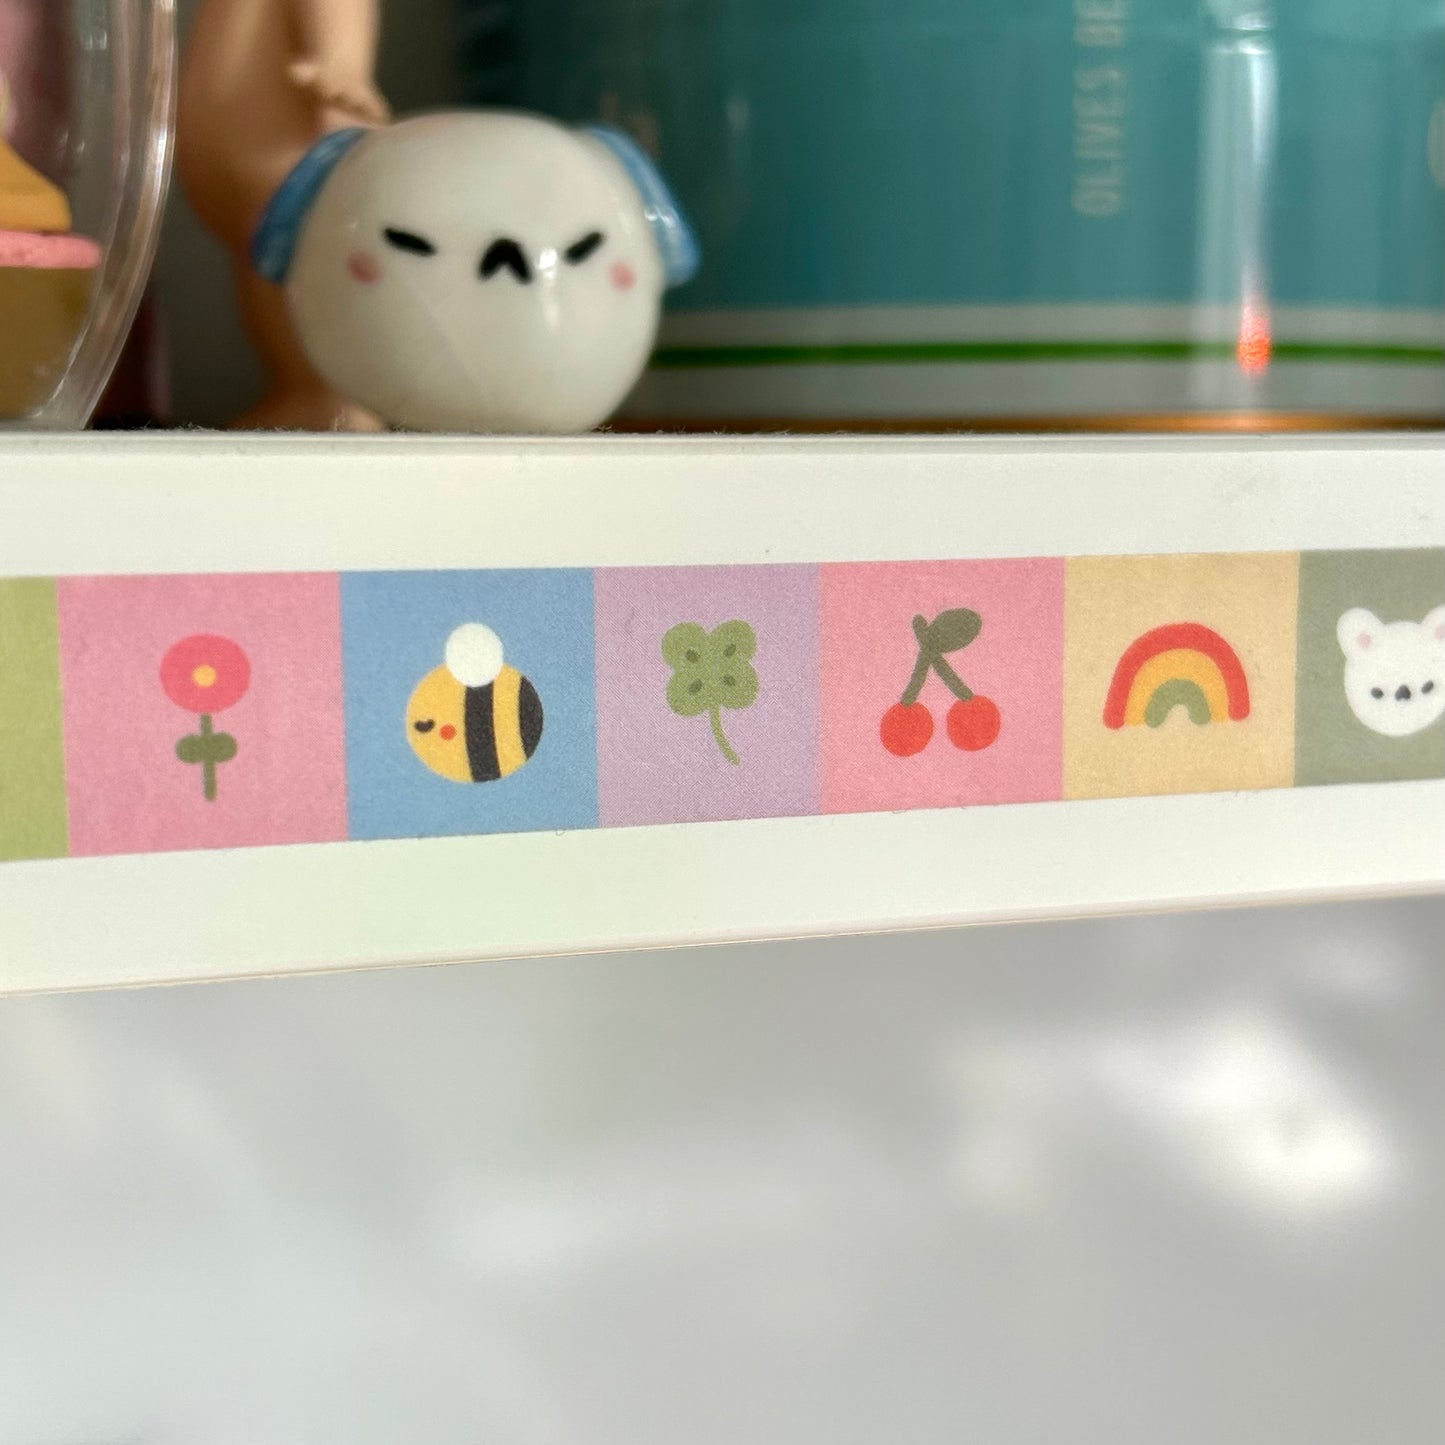 Life is Cute Washi Tape